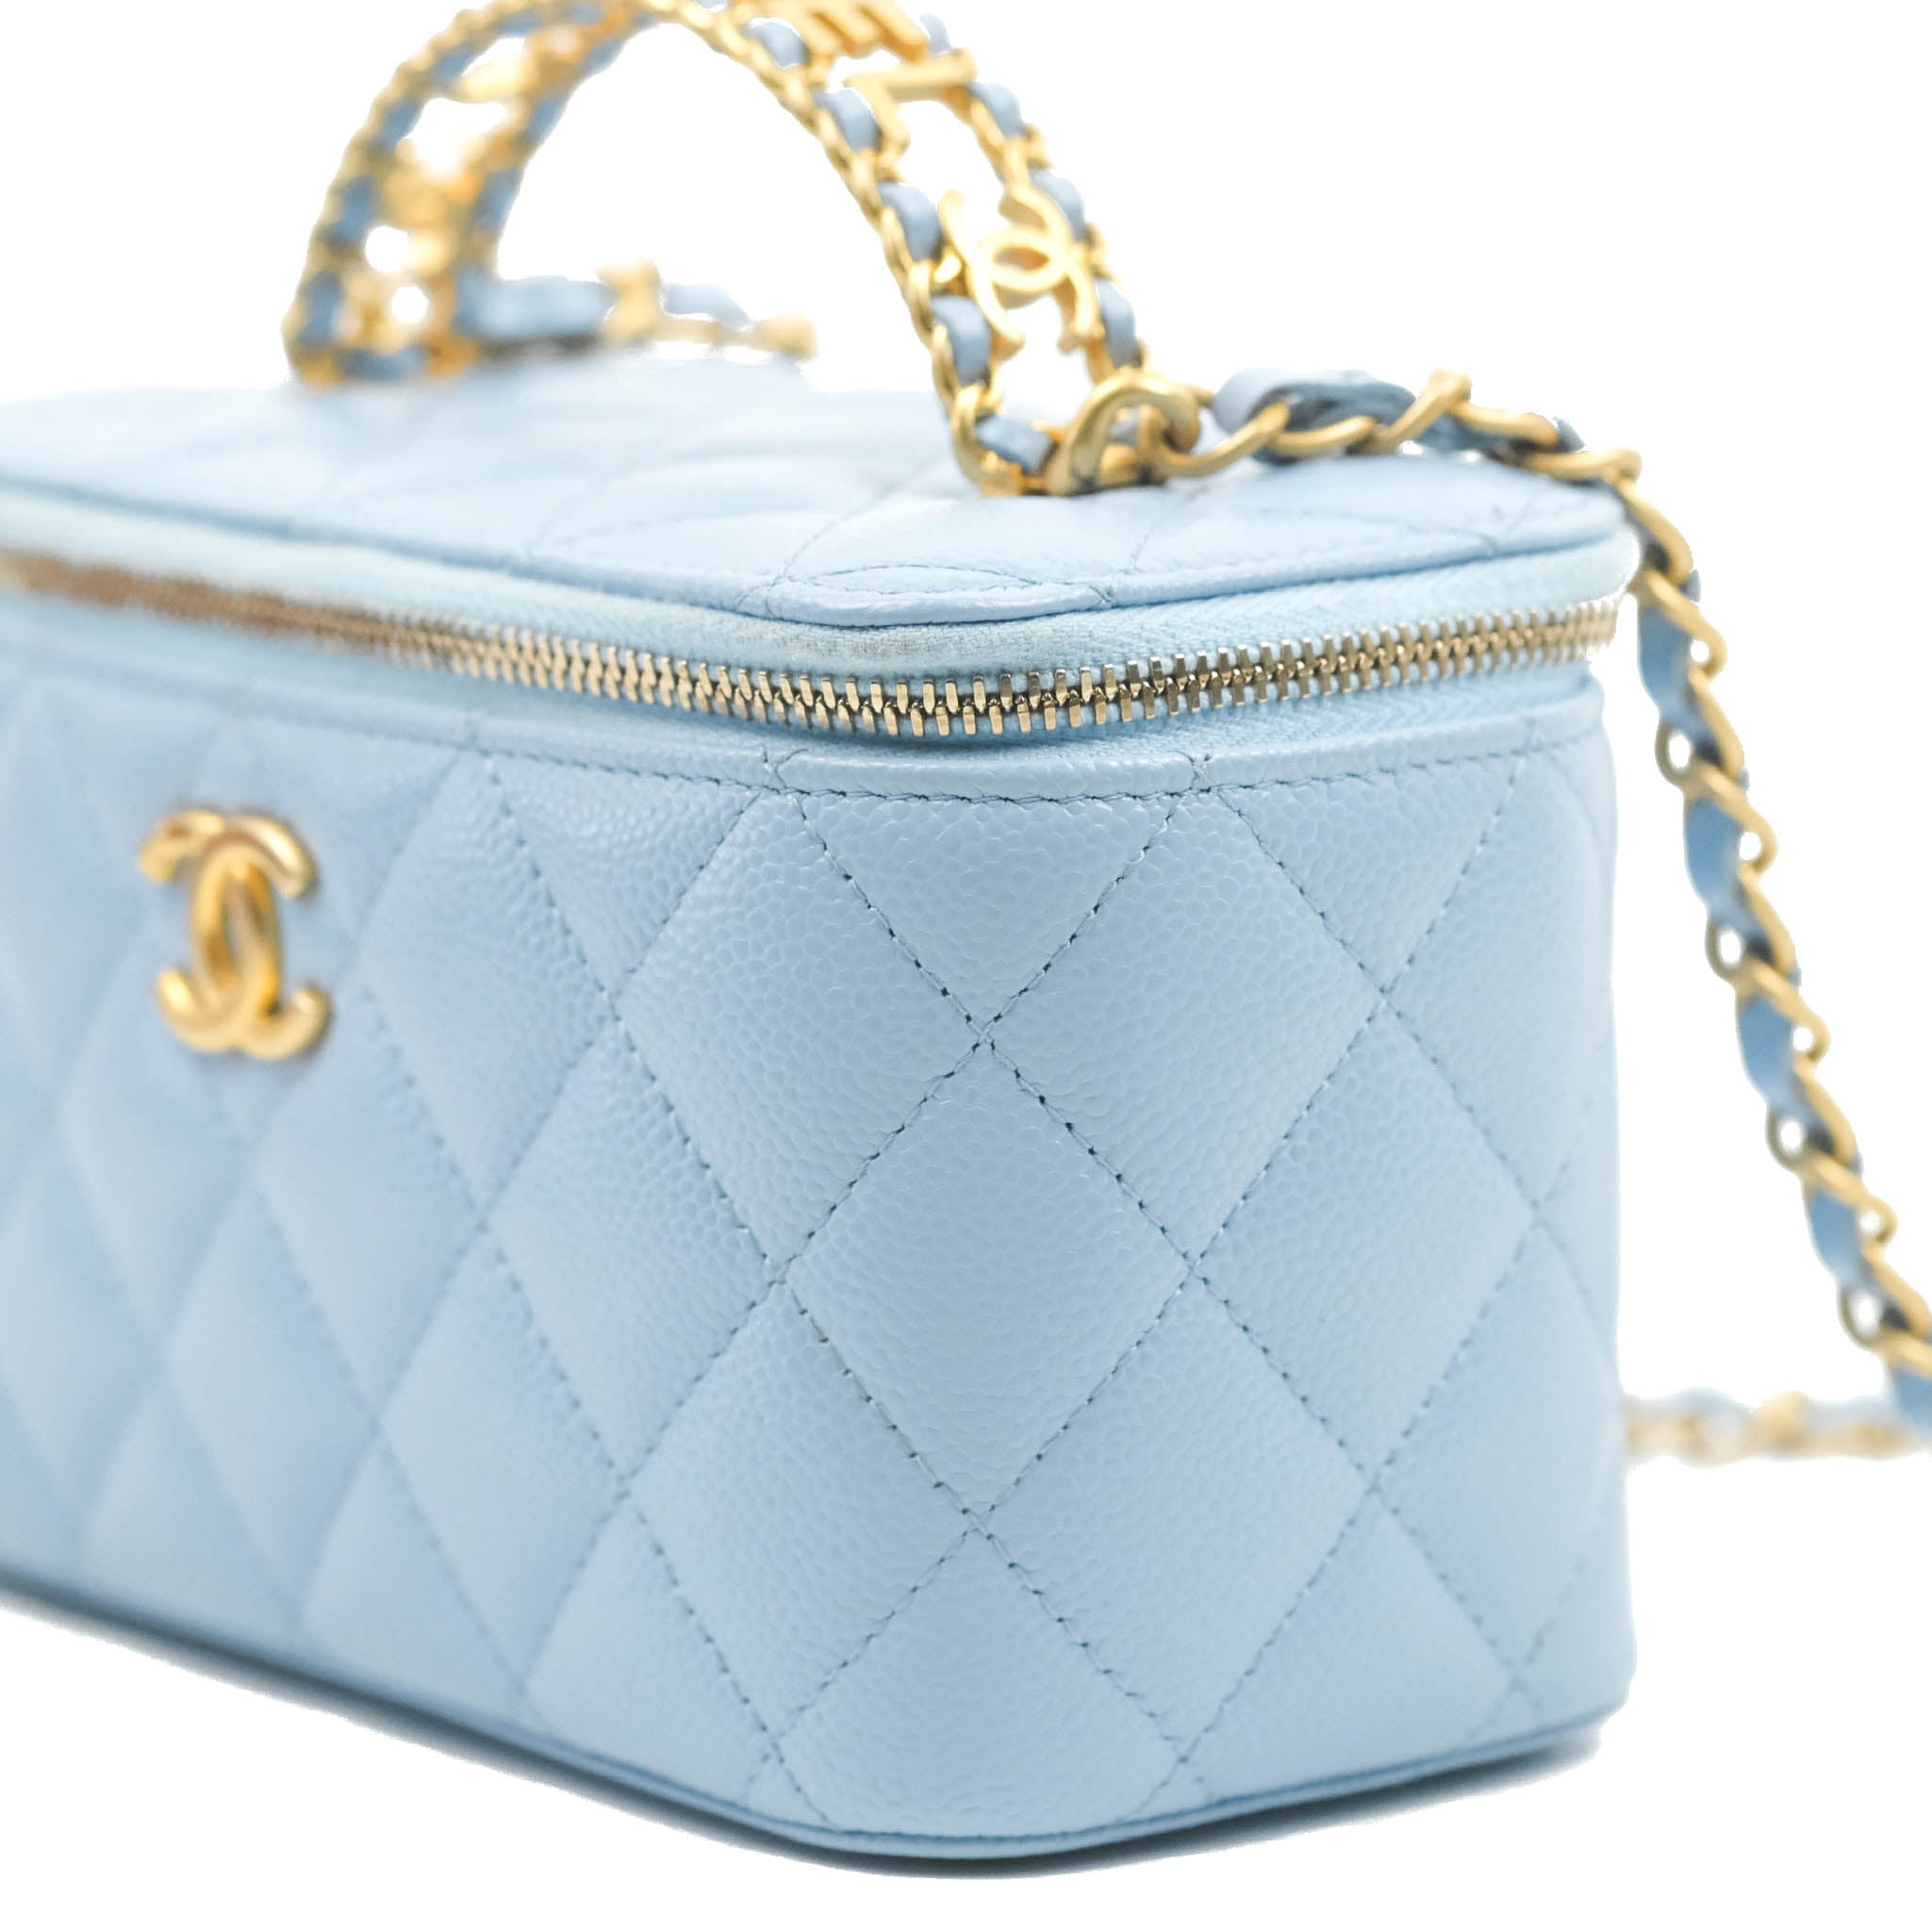 Chanel Vanity Case Review  Fashion, Stylish summer outfits, Style